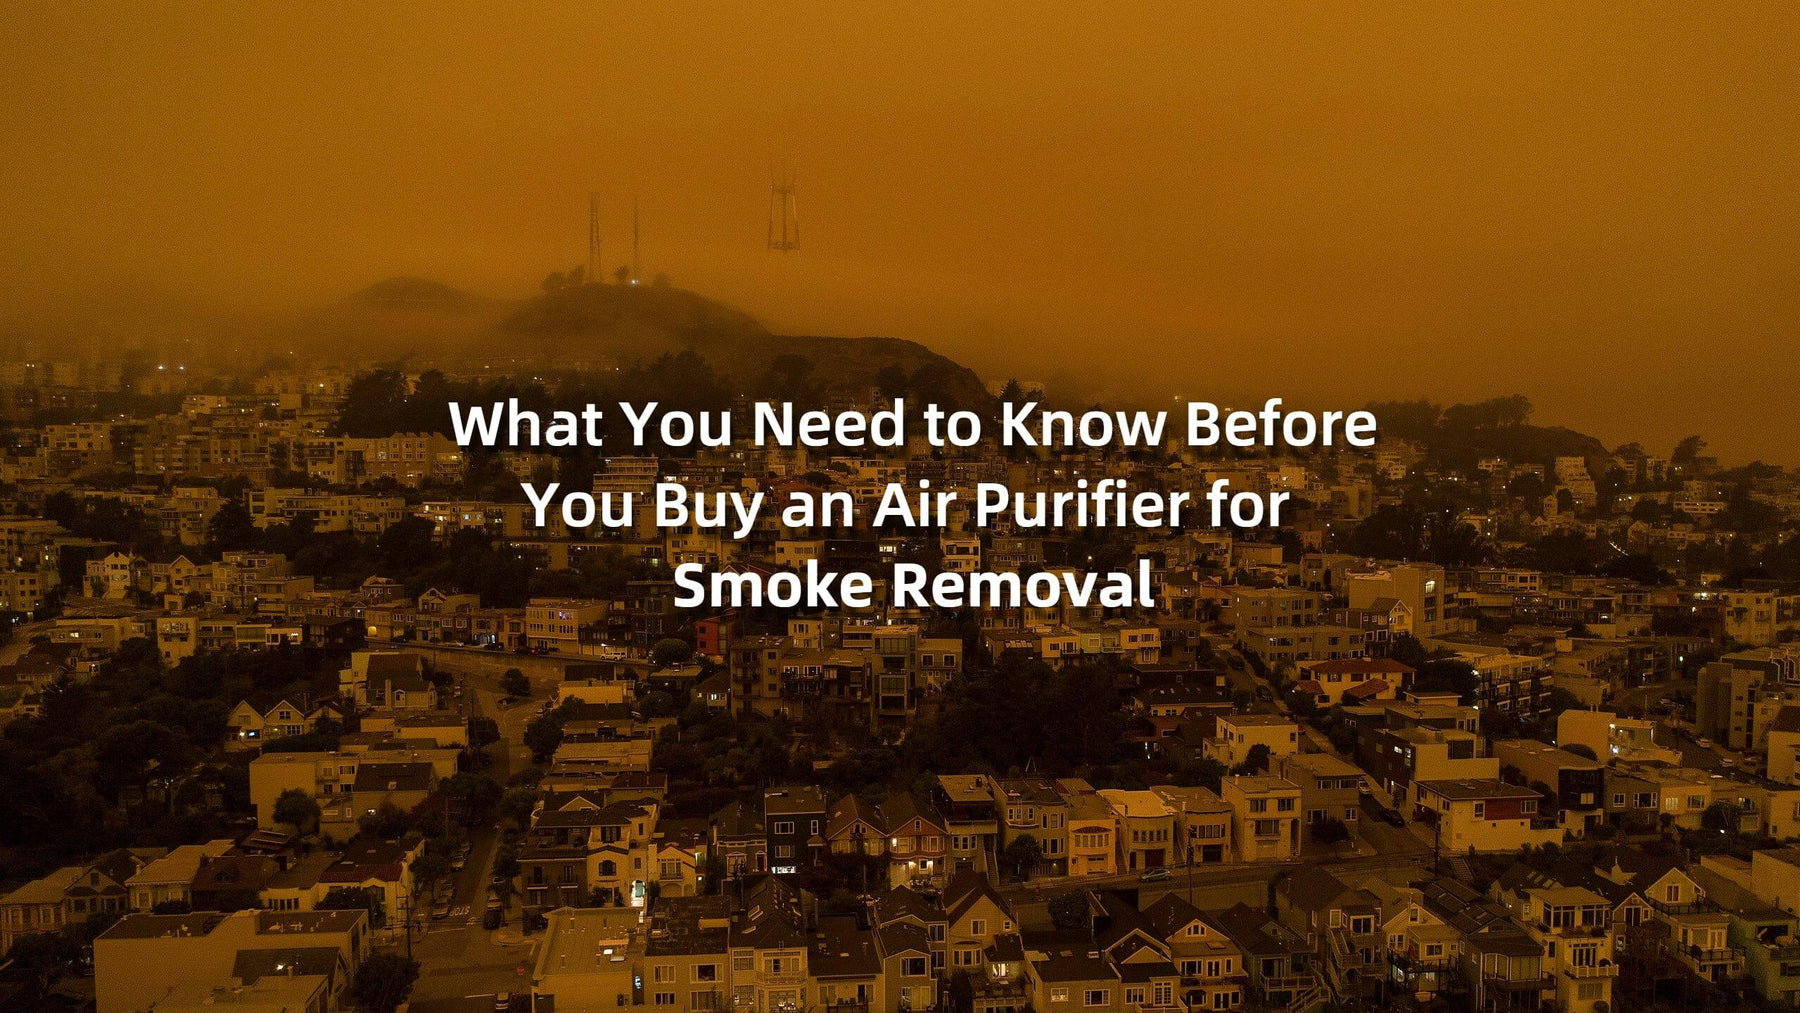 What You Need to Know Before You Buy an Air Purifier for Smoke Removal